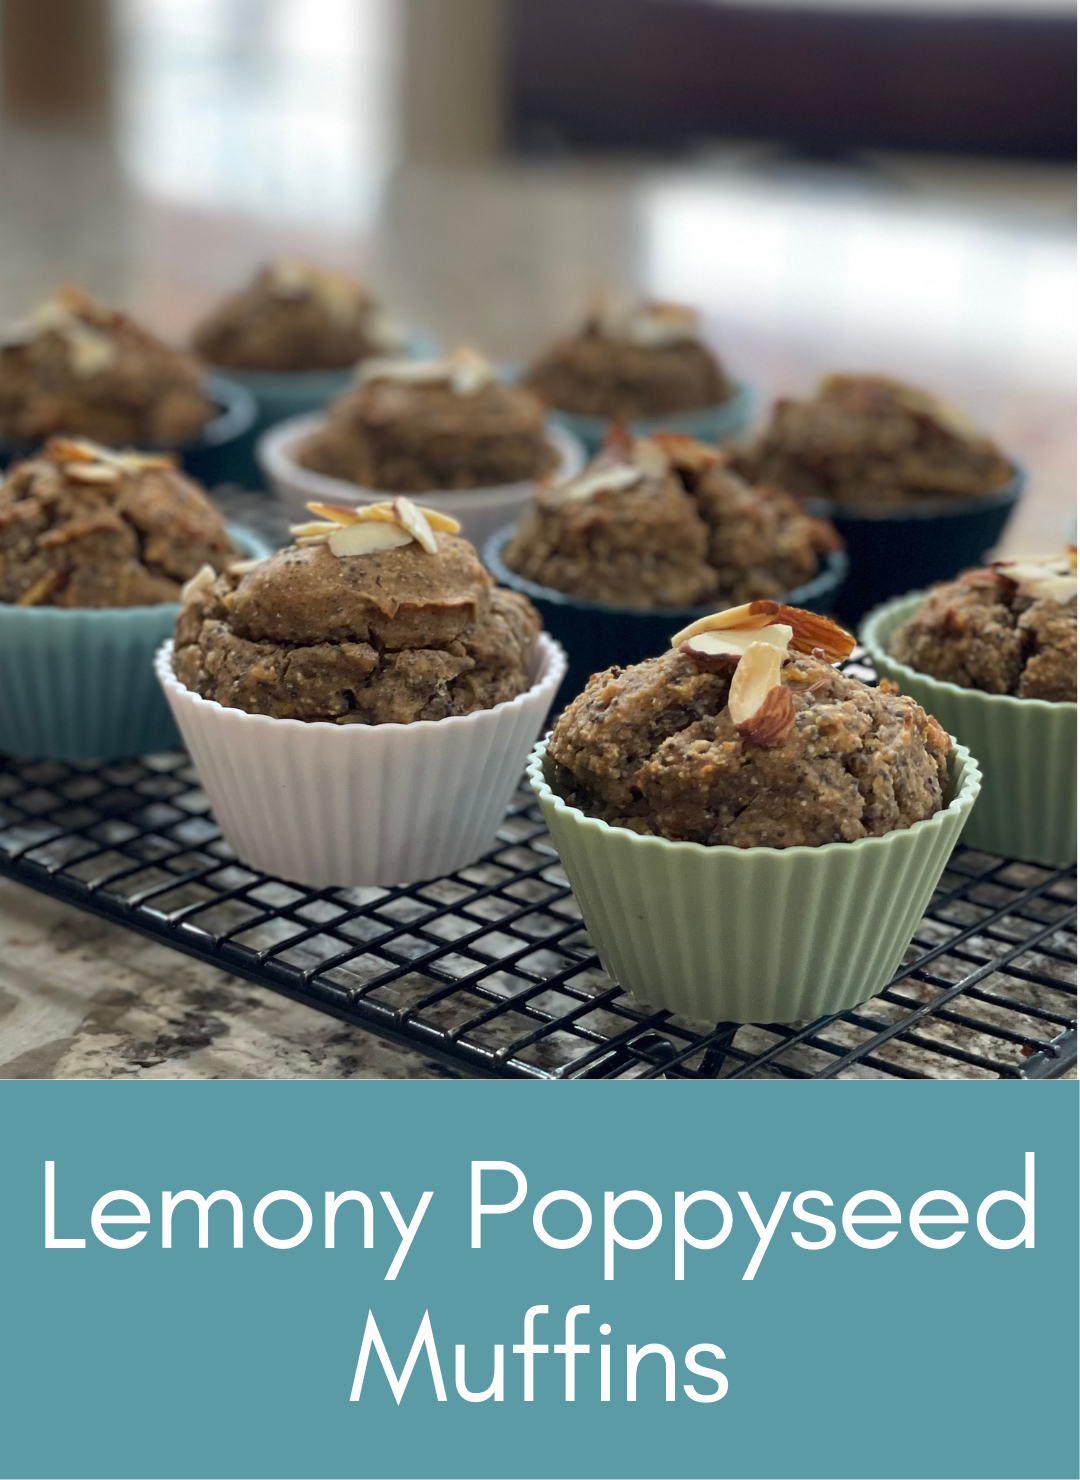 Whole food plant based Lemon poppyseed muffins Picture with link to recipe